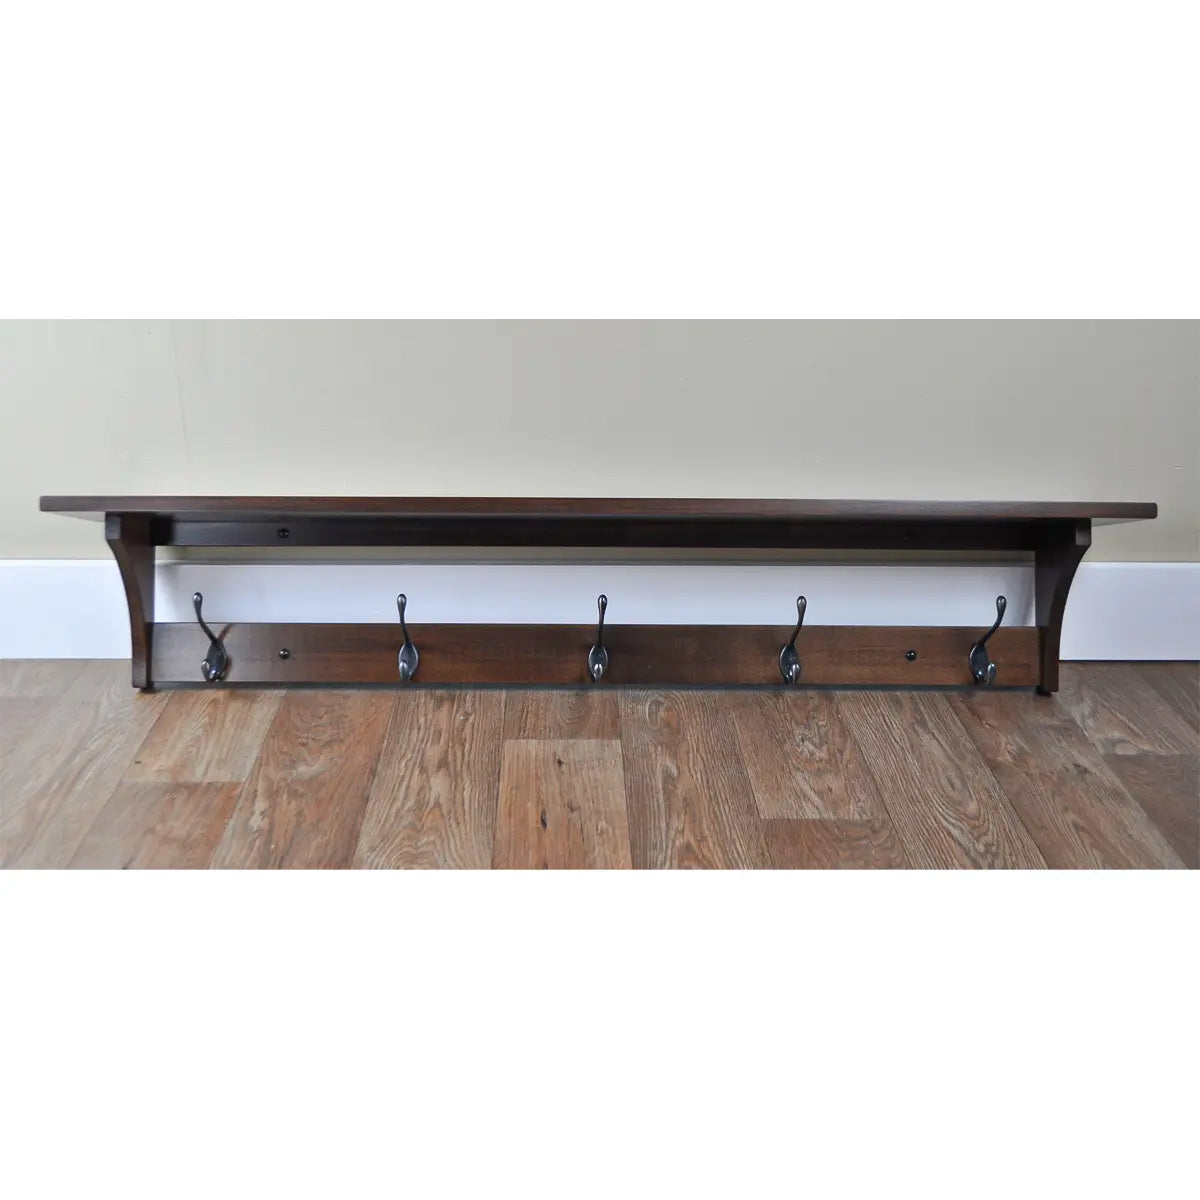 Shaker Style Coat Rack with Shelf, Brown Maple, Coffee Stain